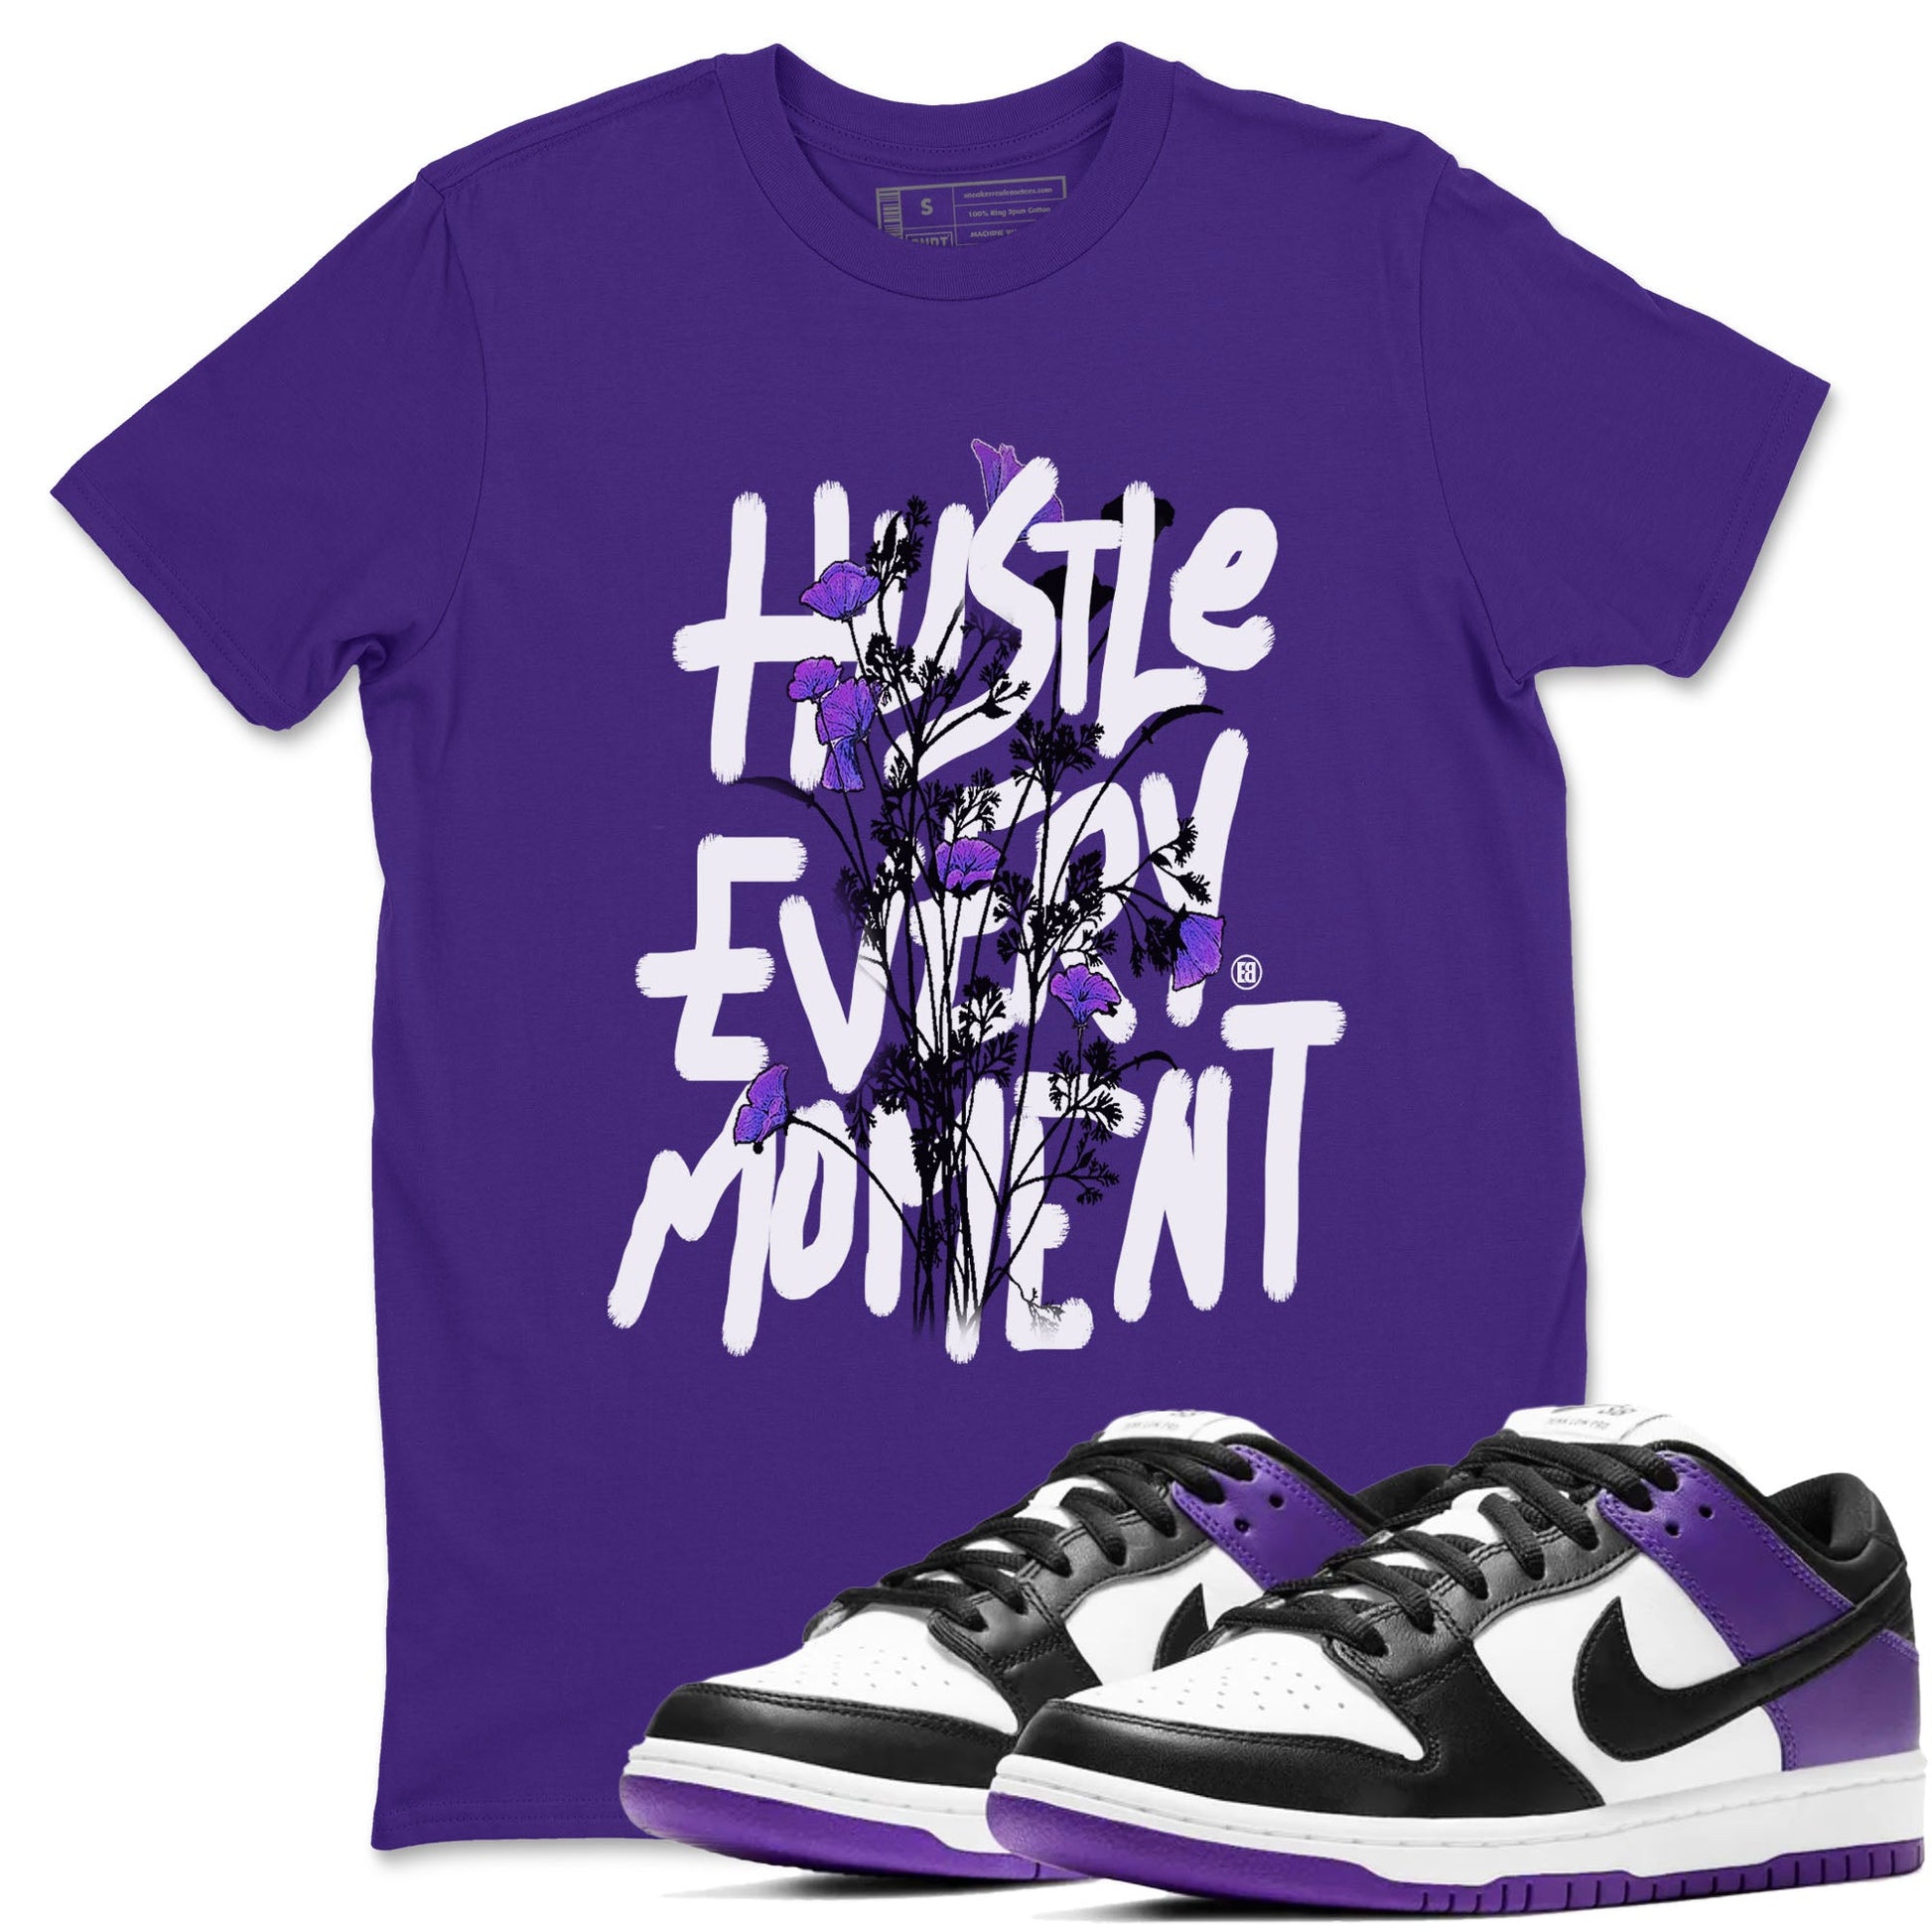 Hustle Every Moment sneaker match tees to Court Purple Dunks street fashion brand for shirts to match Jordans SNRT Sneaker Tees Dunk Low Court Purple unisex t-shirt Purple 1 unisex shirt